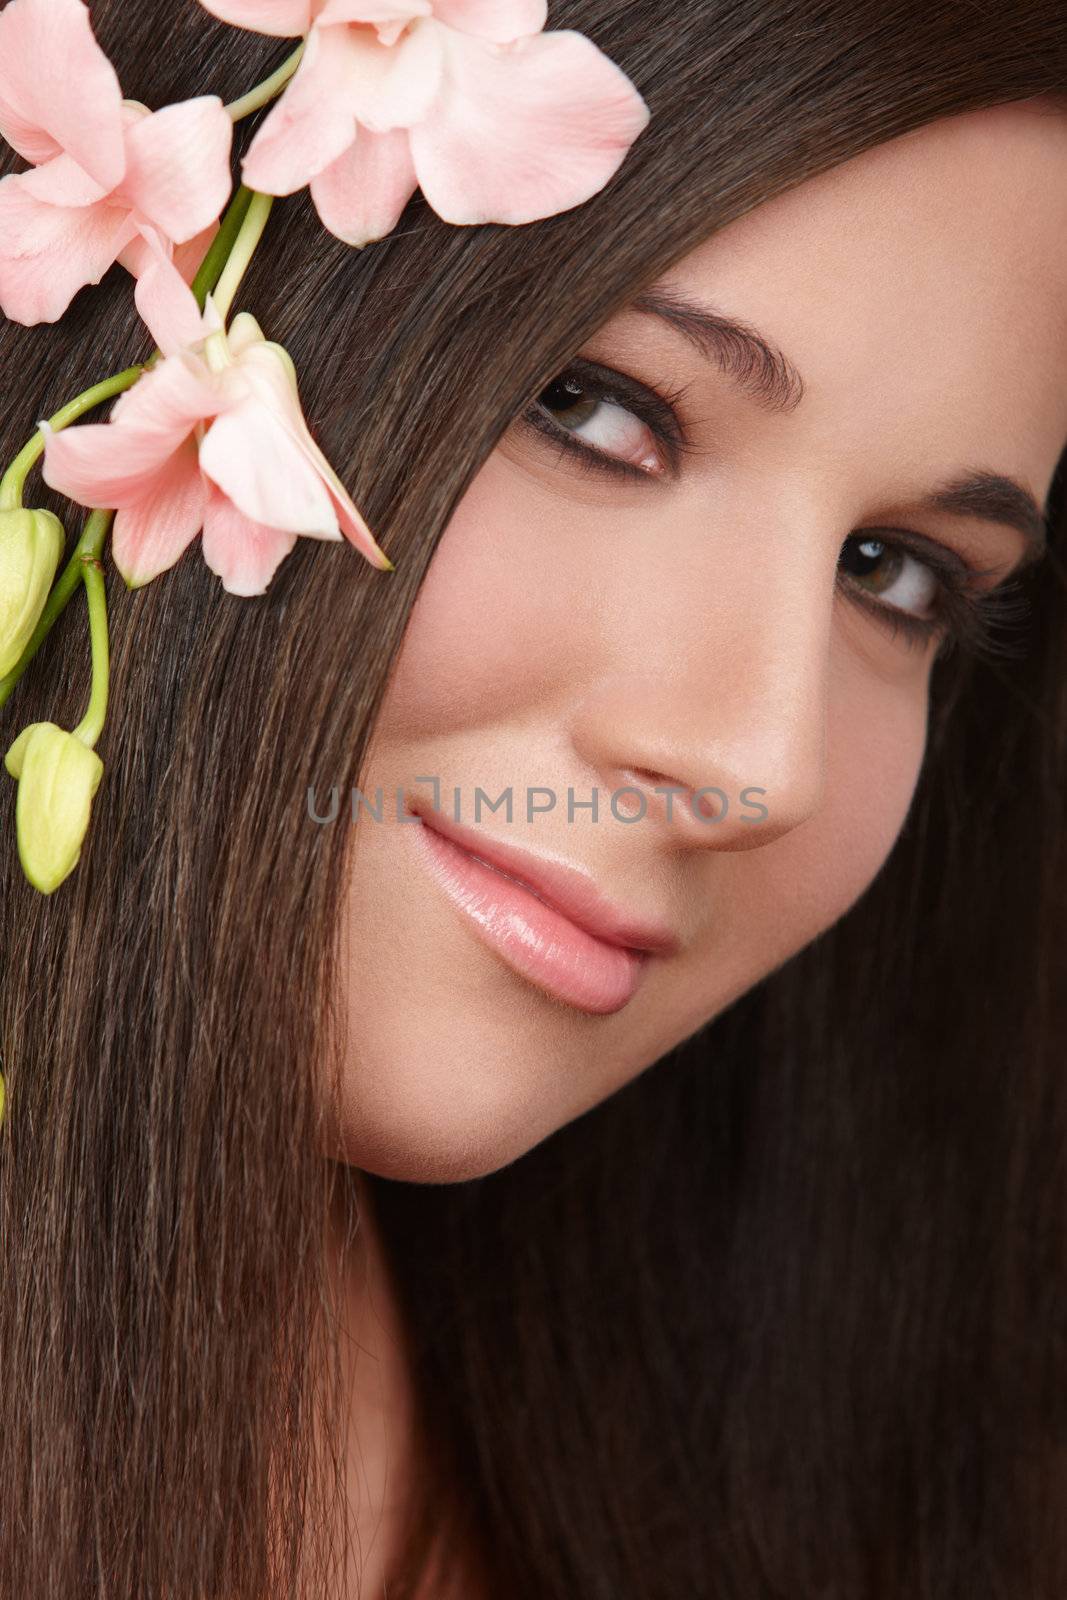 Portrait of young girl with beautiful straight hair